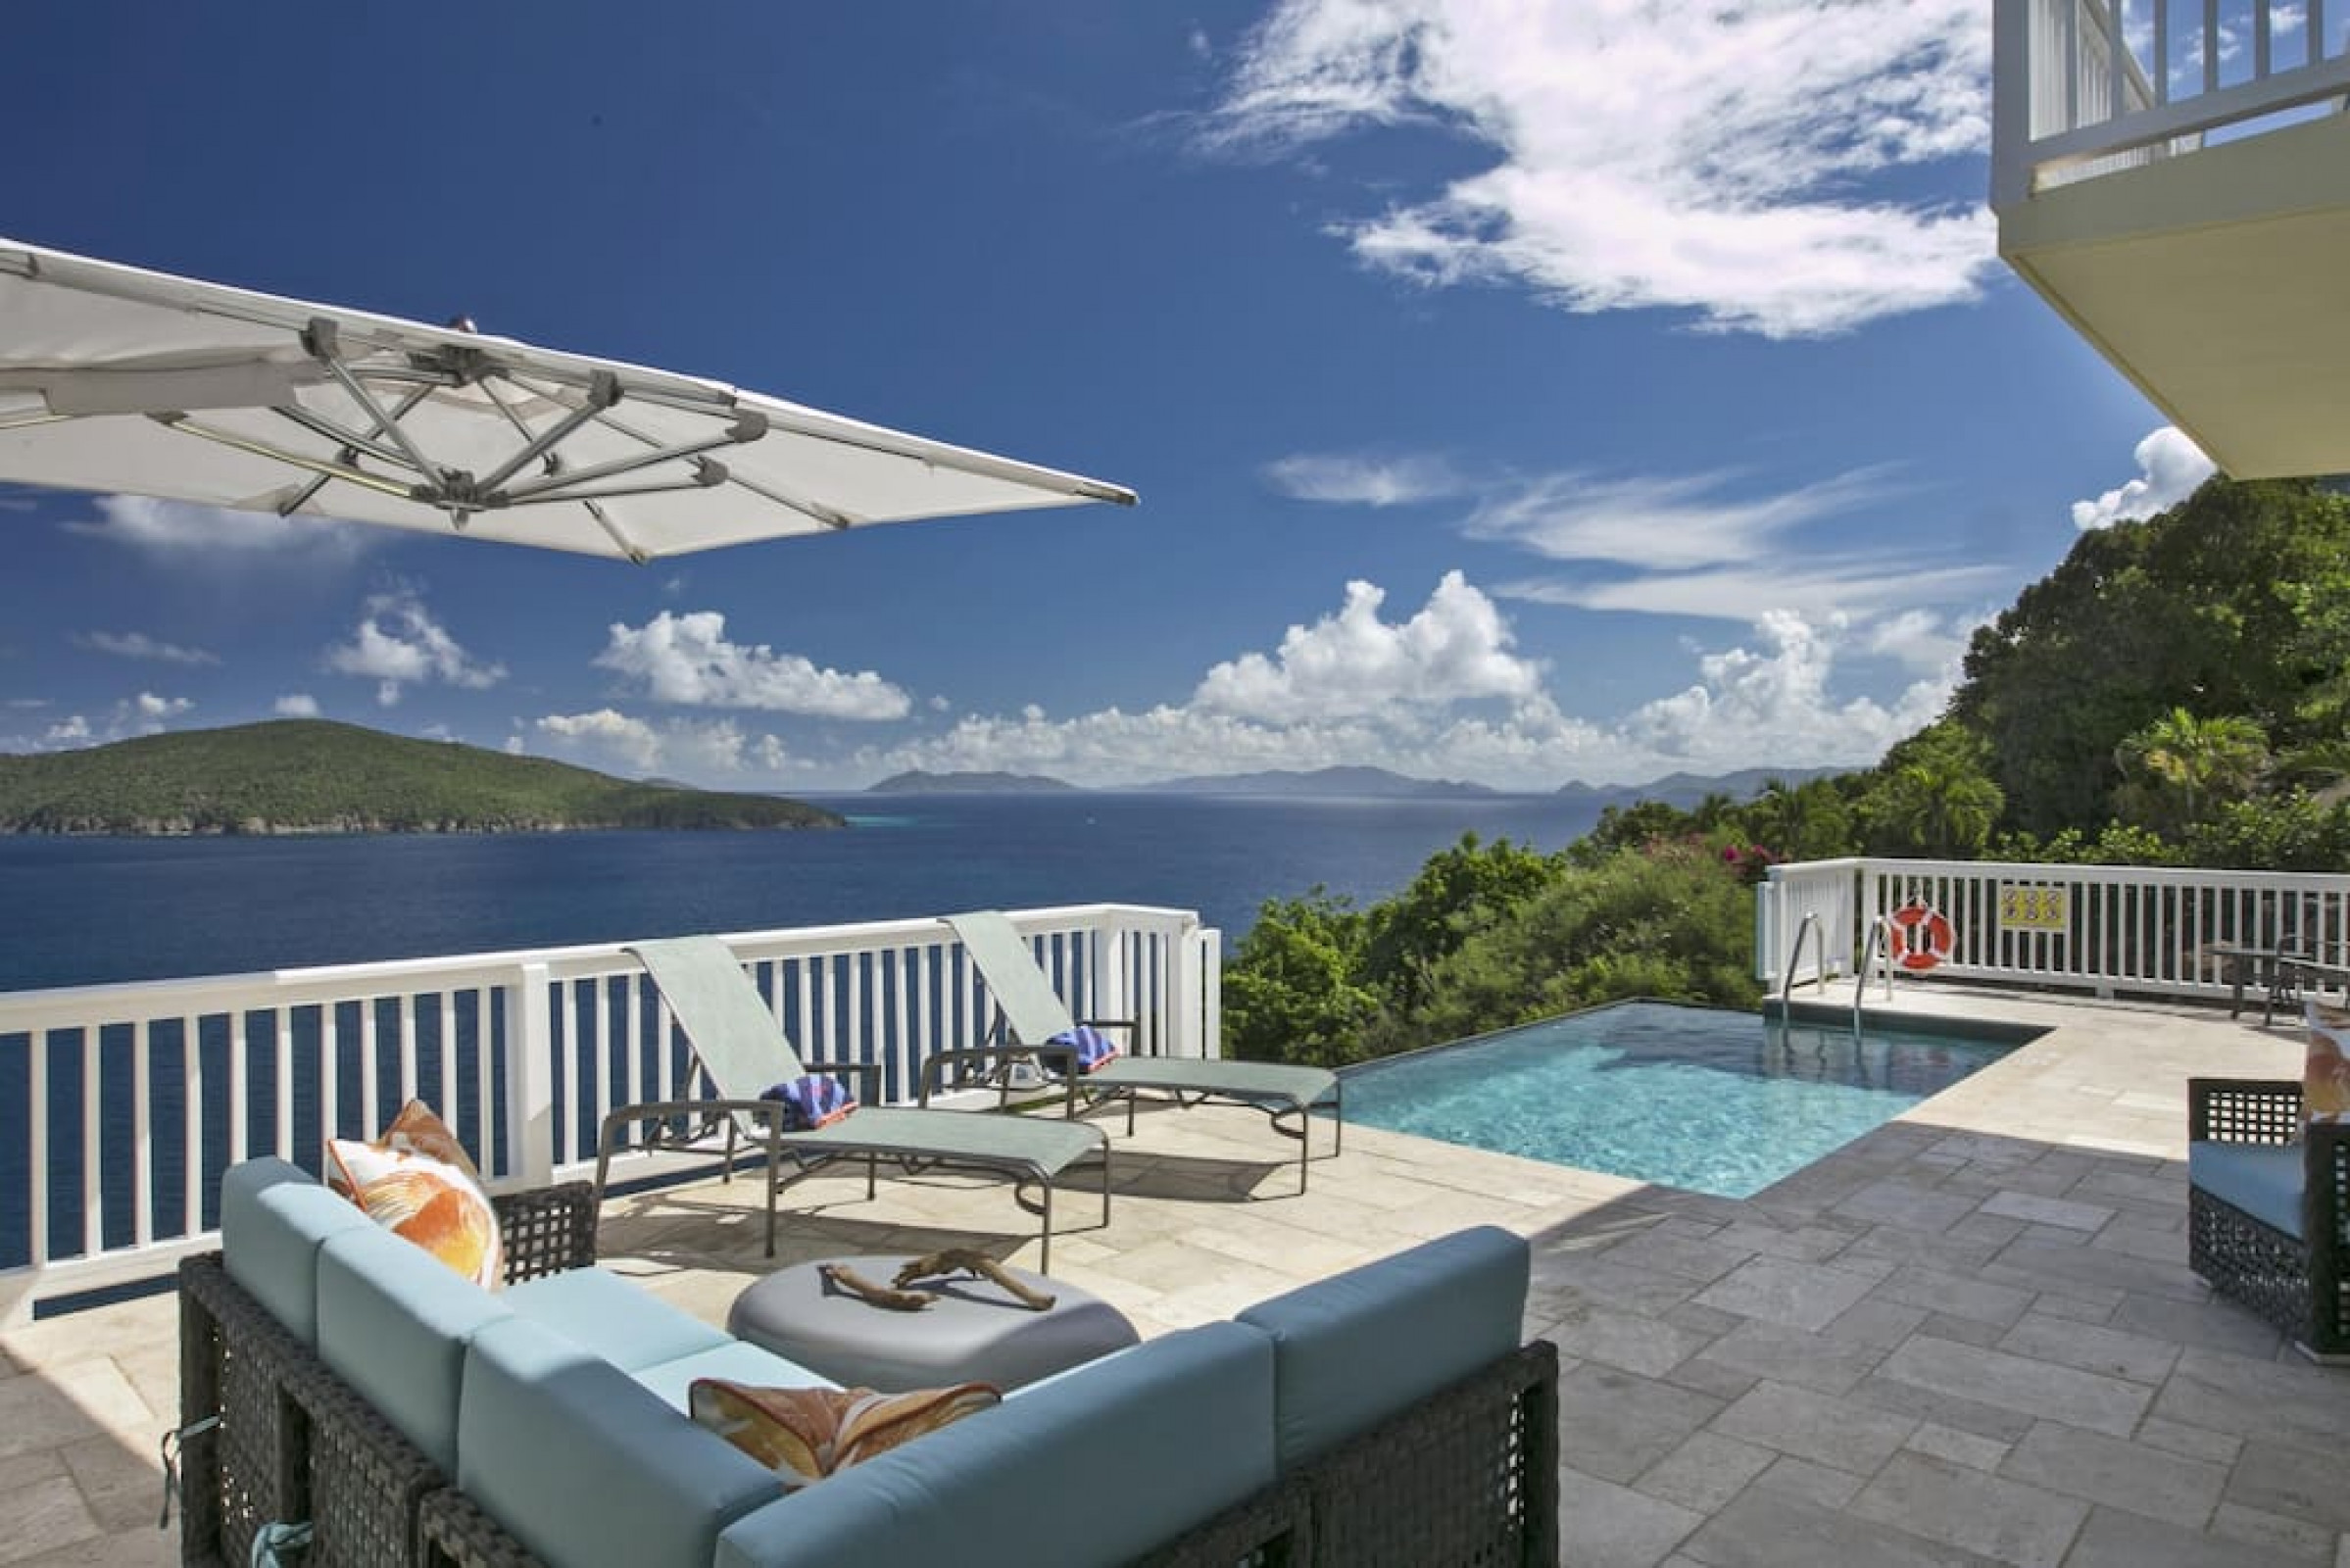 Property Image 1 - Calypso Delight - 5BR villa with stunning views, just minutes from Magen’s Bay!